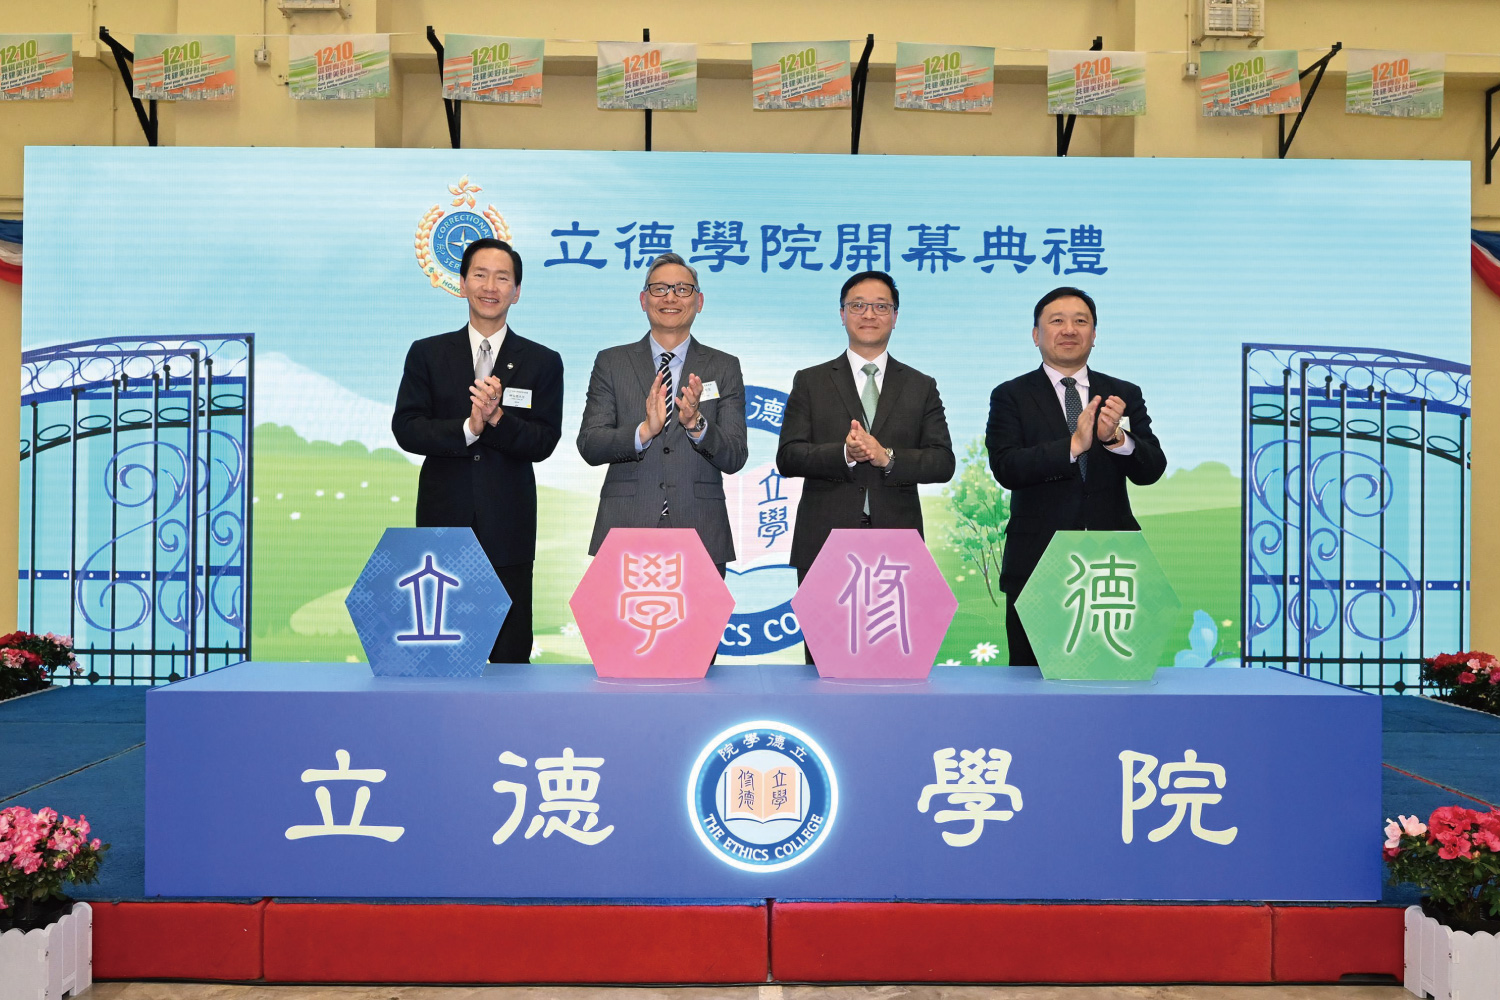 The CSD holds the opening ceremony of the Ethics College at Pak Sha Wan Correctional Institution. The Under Secretary for Security, Mr Michael Cheuk (second from left); the Commissioner of Correctional Services, Mr Wong Kwok-hing (second from right); Steward of the Hong Kong Jockey Club Mr Bernard Chan (first from left); and the Council Chairman of the Hong Kong Metropolitan University, Dr Conrad Wong (first from right), officiate the opening ceremony.